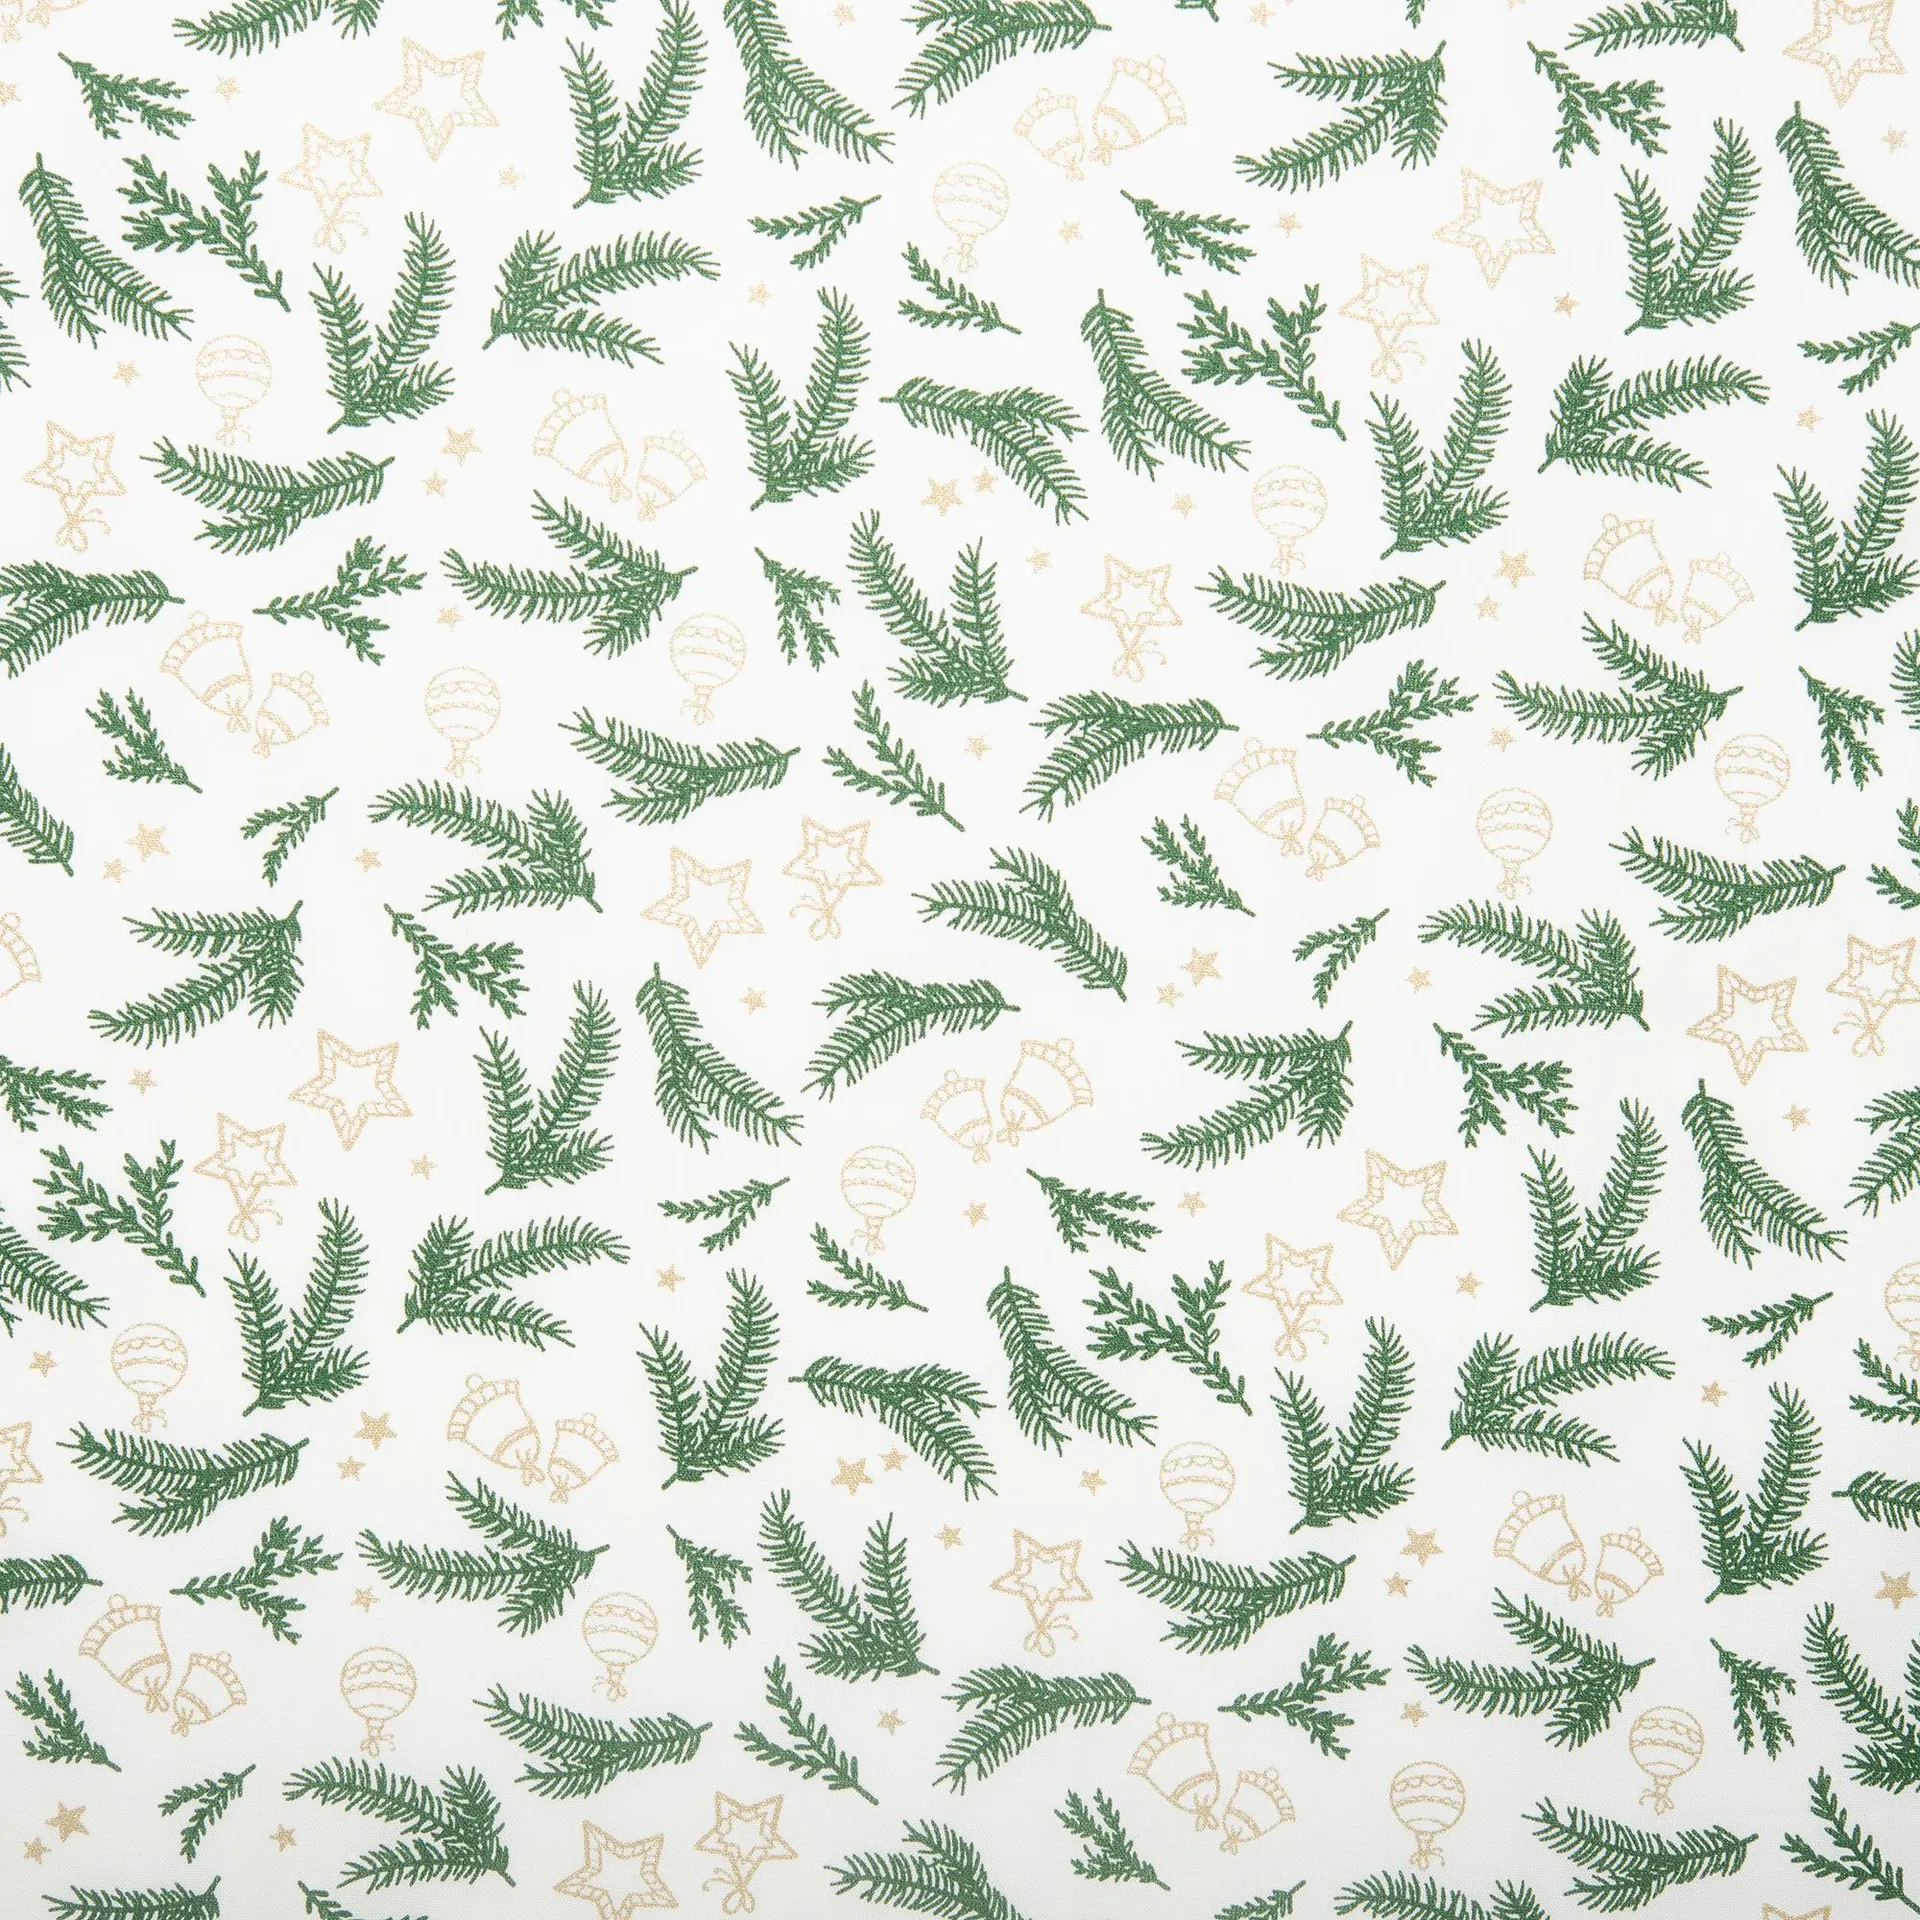 Christmas printed cotton - Leafs - White / Green